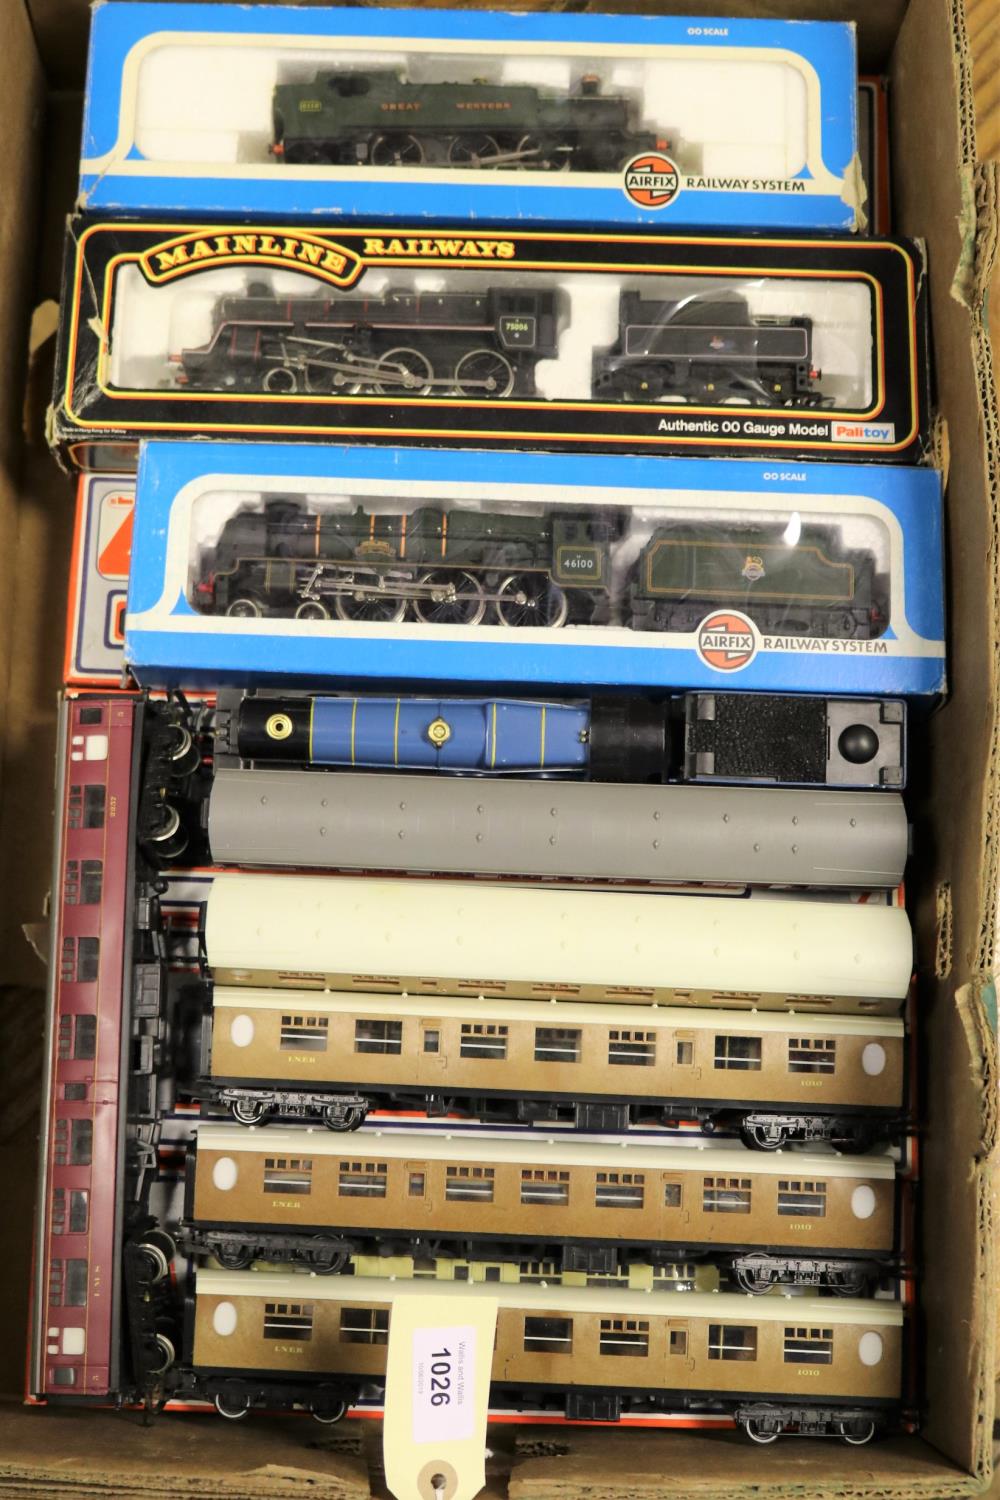 Quantity of OO railway by Hornby, Airfix, Lima etc. 4 locomotives - 3 being tender locomotives -